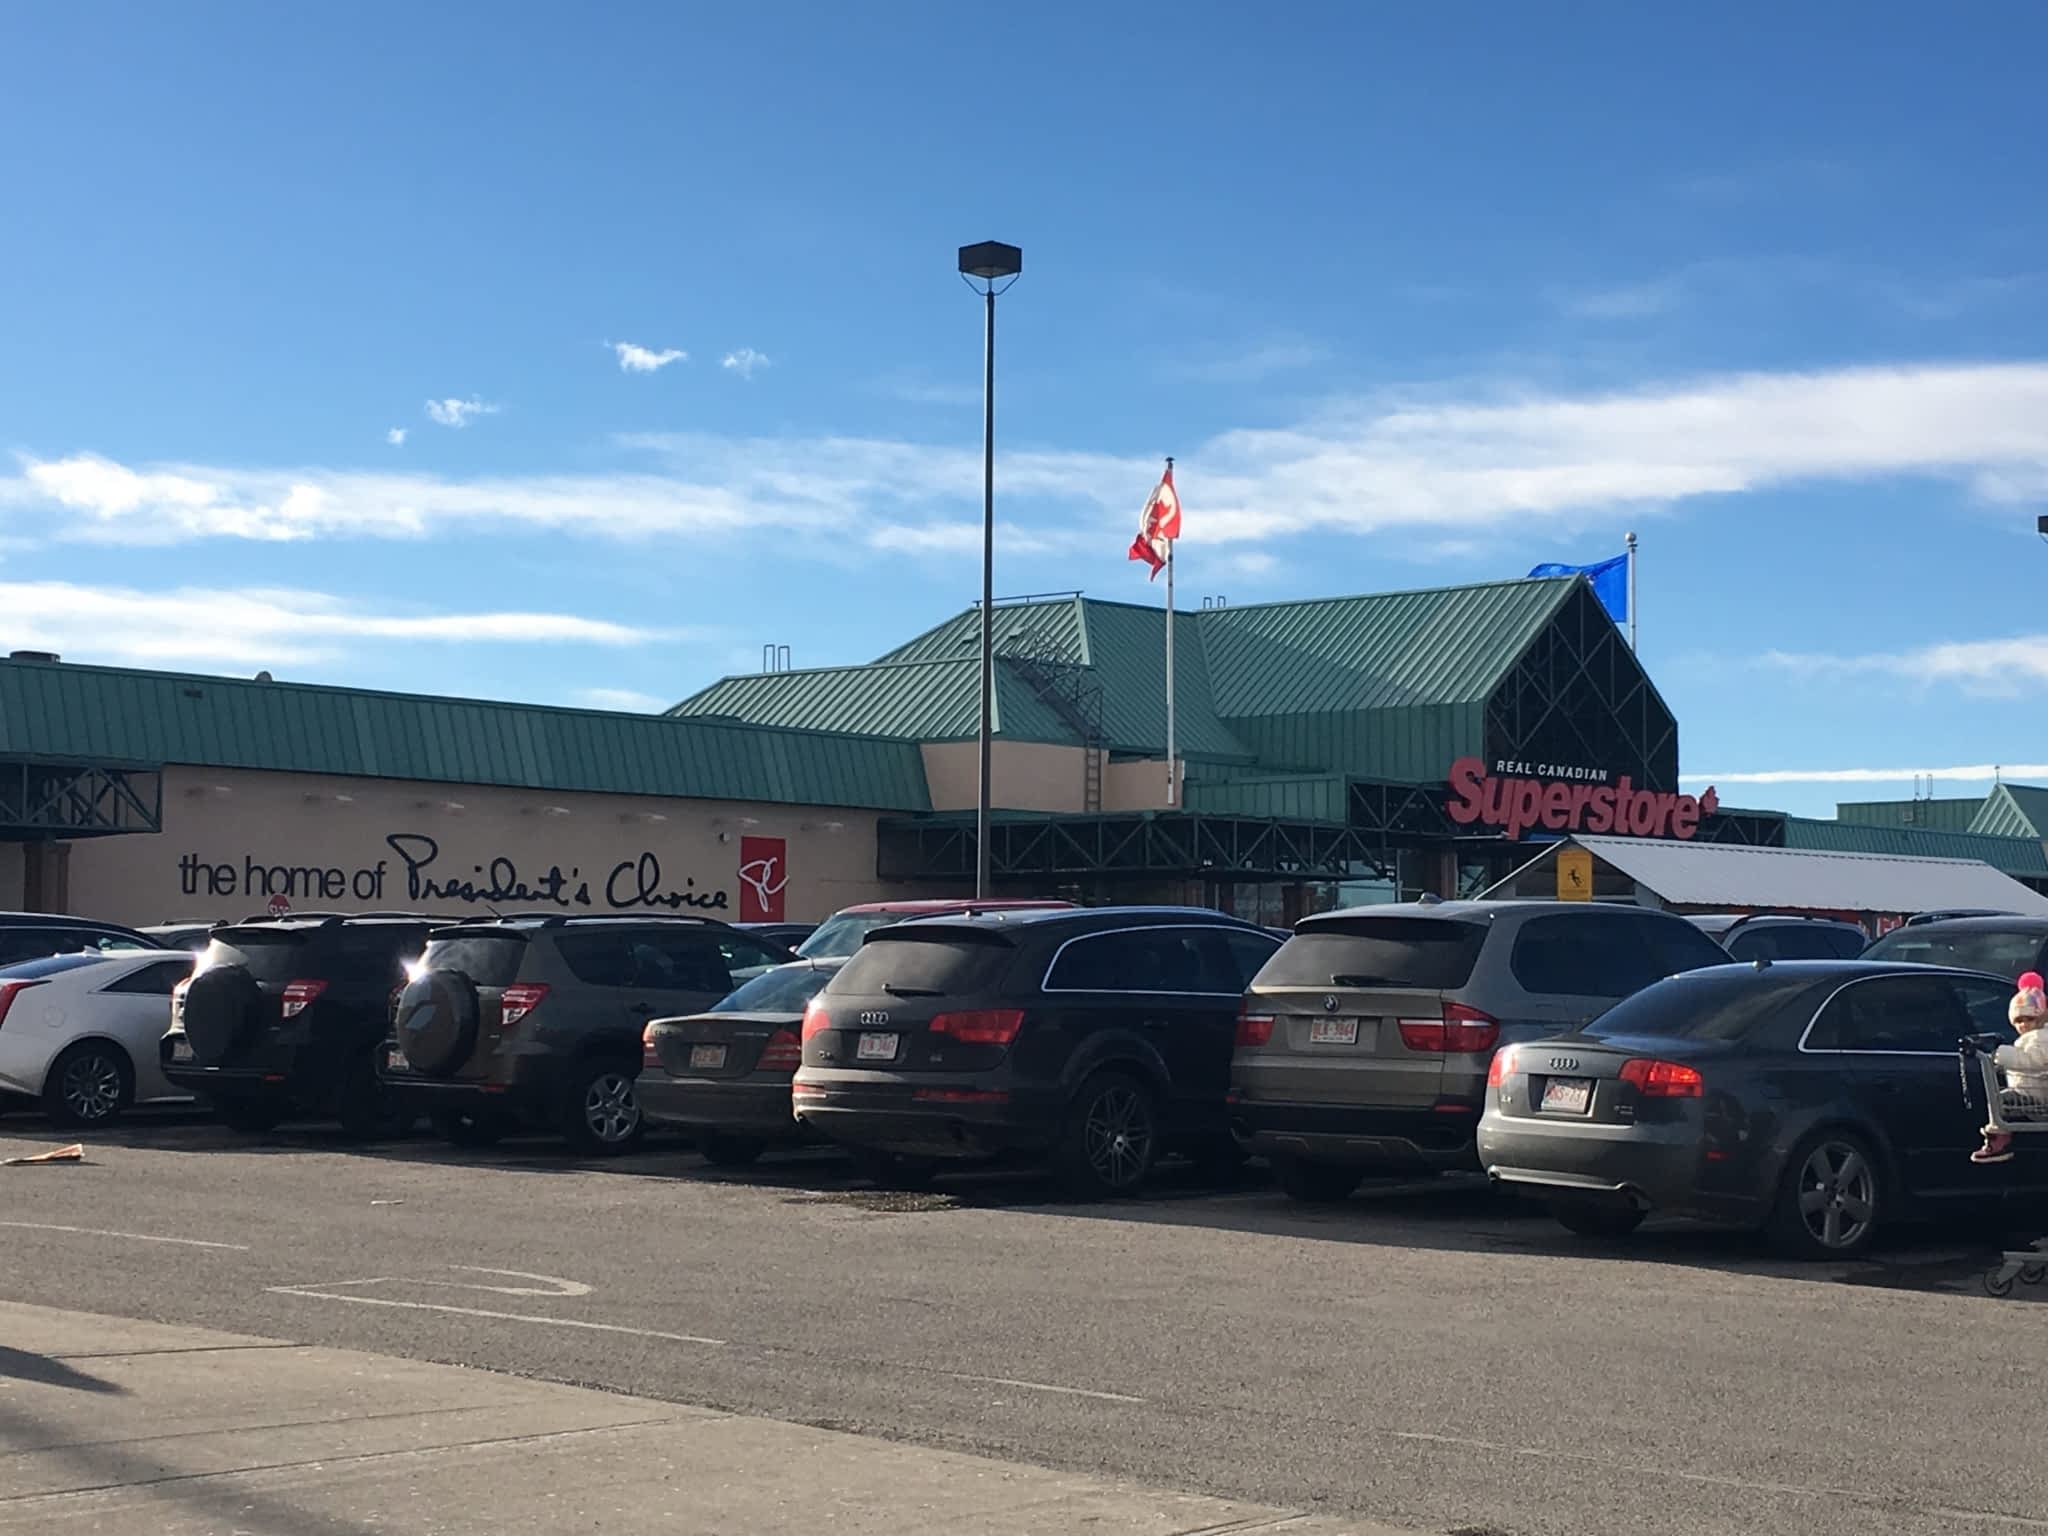 photo Real Canadian Superstore